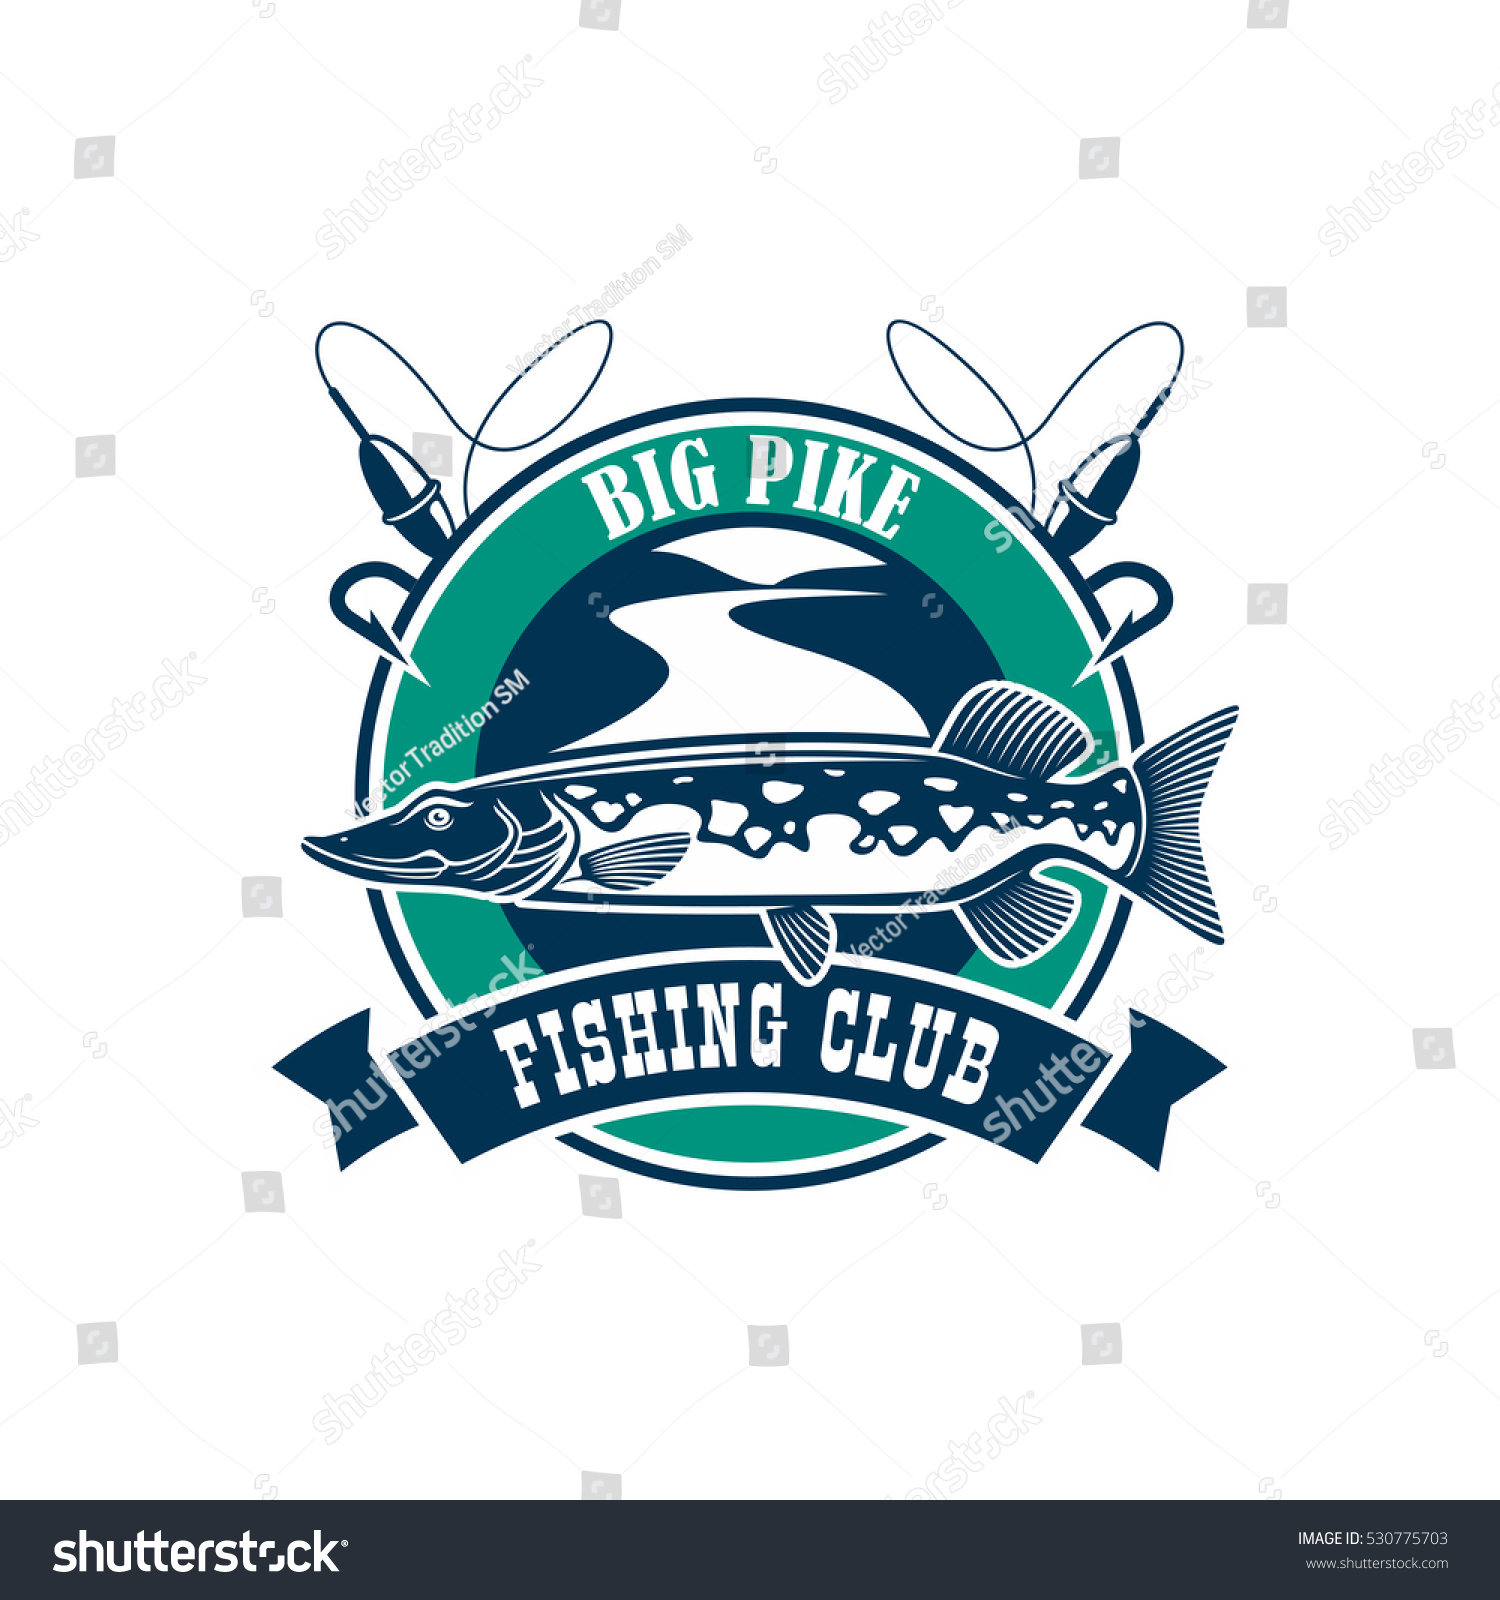 Download Fishing Club Isolated Icon Vector Fisherman Stock Vector ...